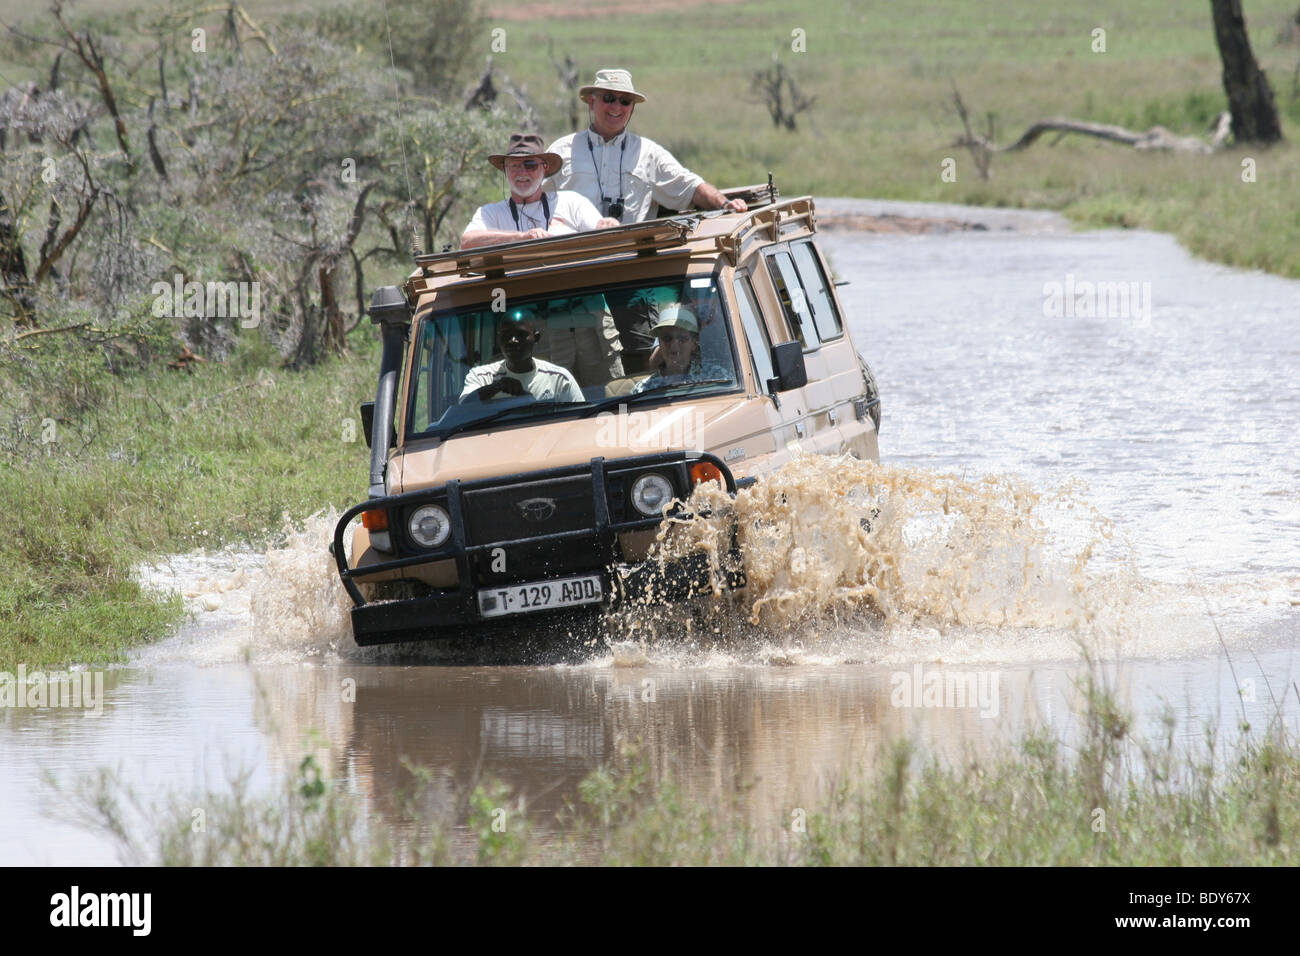 Africa, Tanzania, Serengeti National Park, Safari tourists in an open top Jeep crossing a water barrier Stock Photo